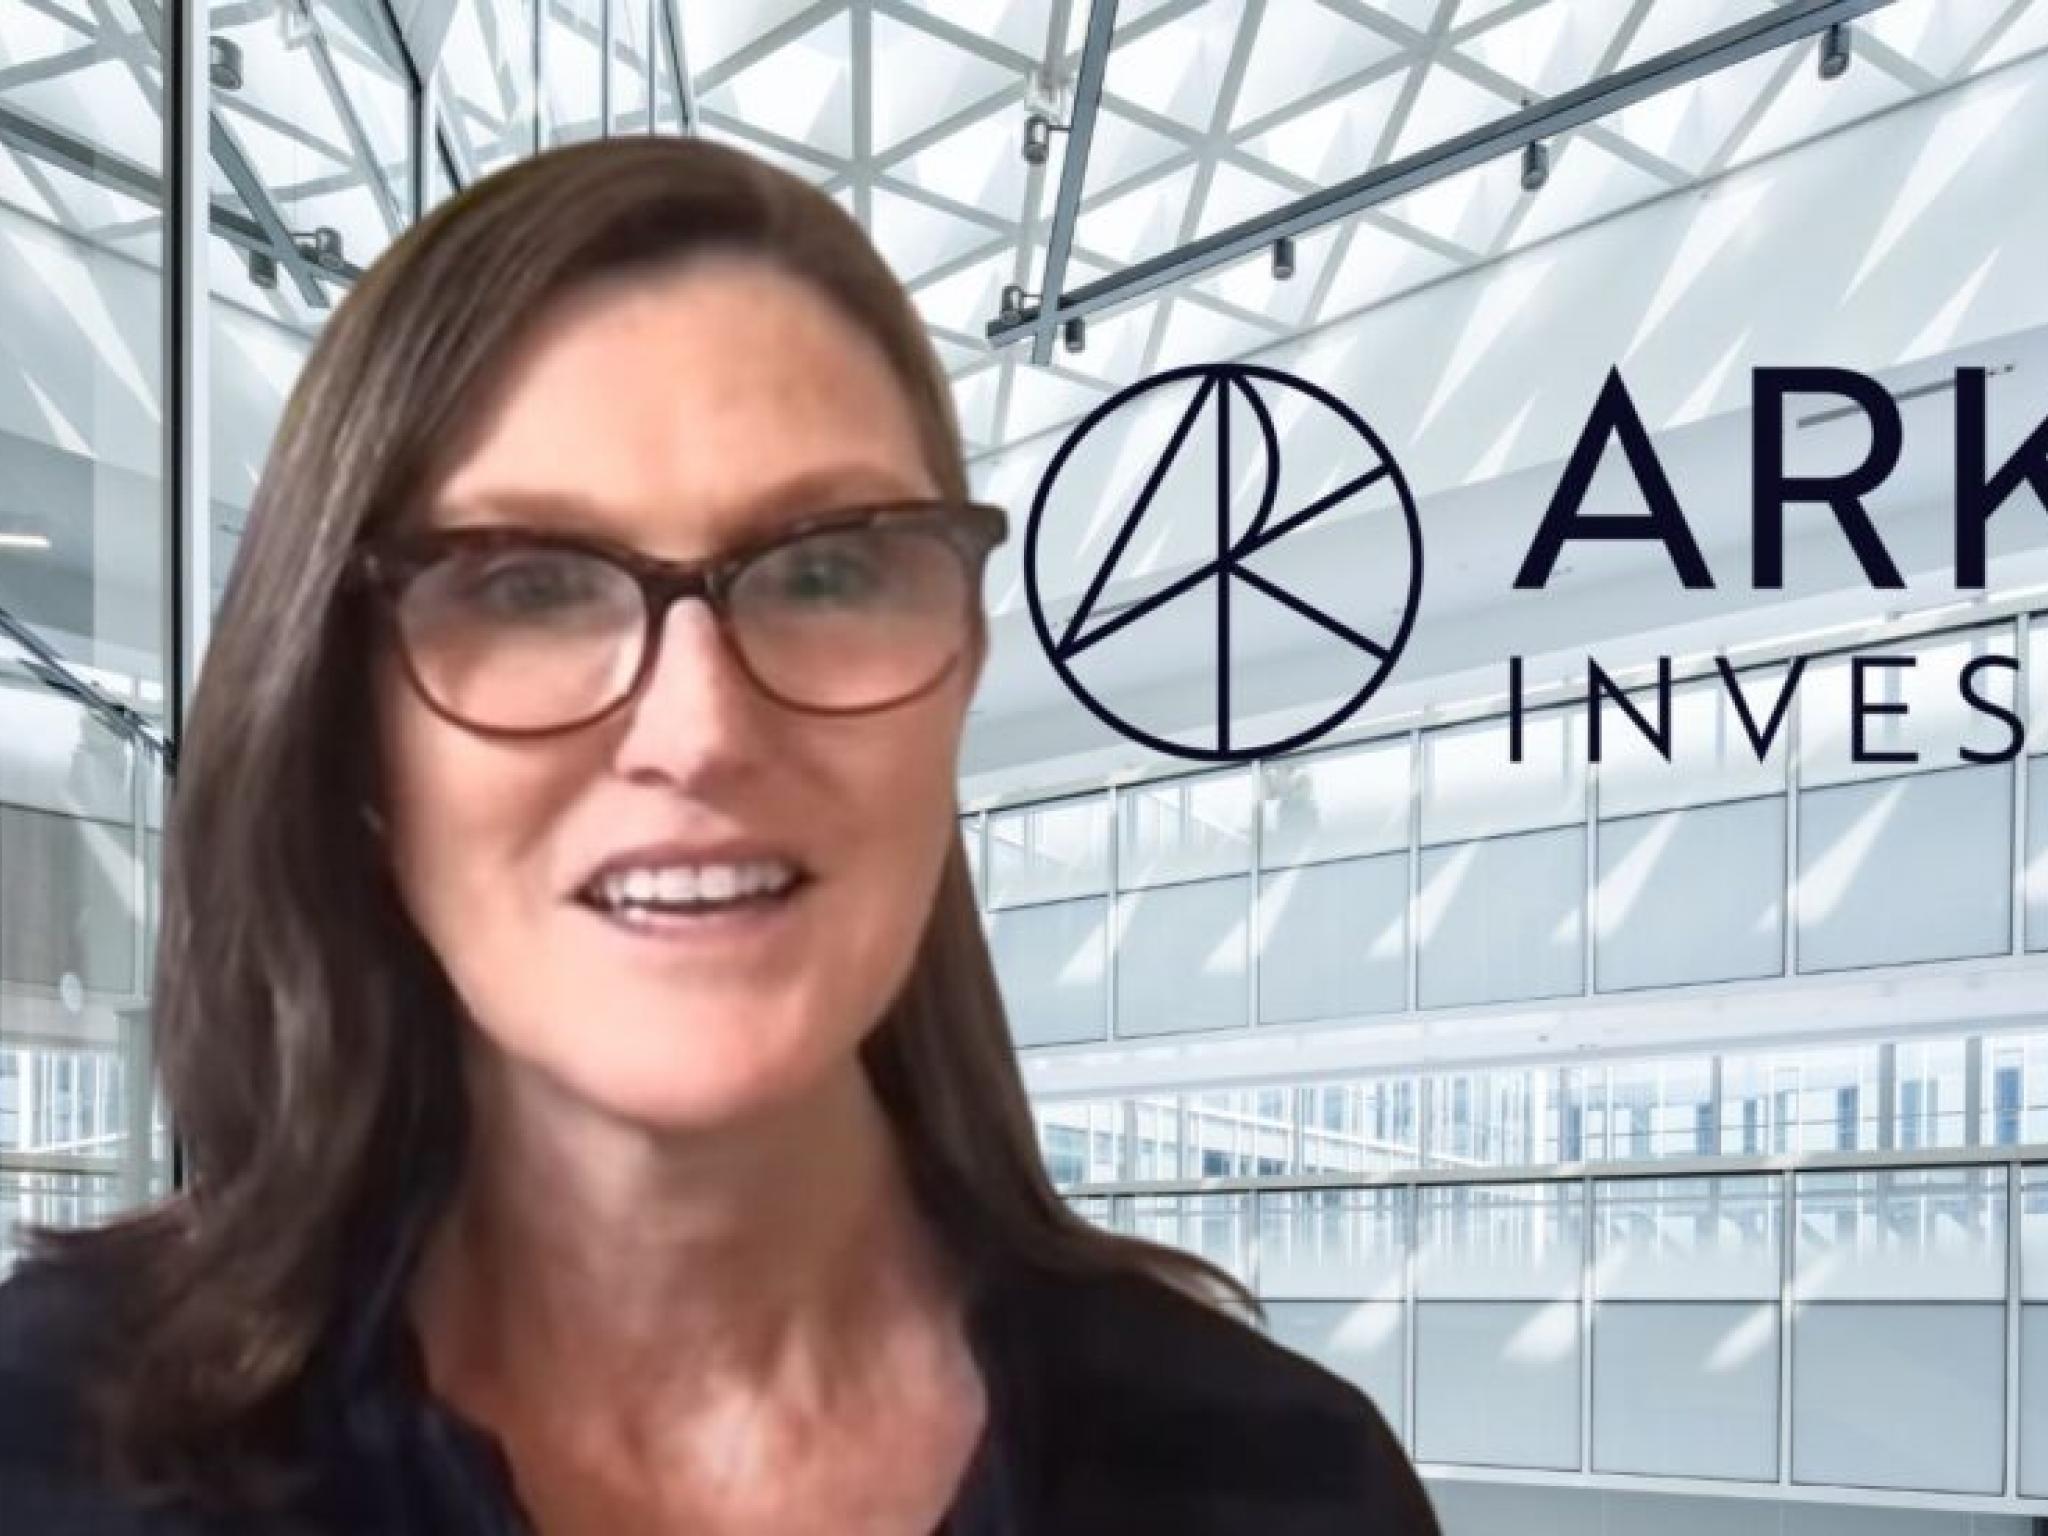  cathie-wood-goes-shopping-for-stock-of-jack-dorseys-block--ark-invest-bolsters-portfolio-with-archer-aviation-crispr-shares 